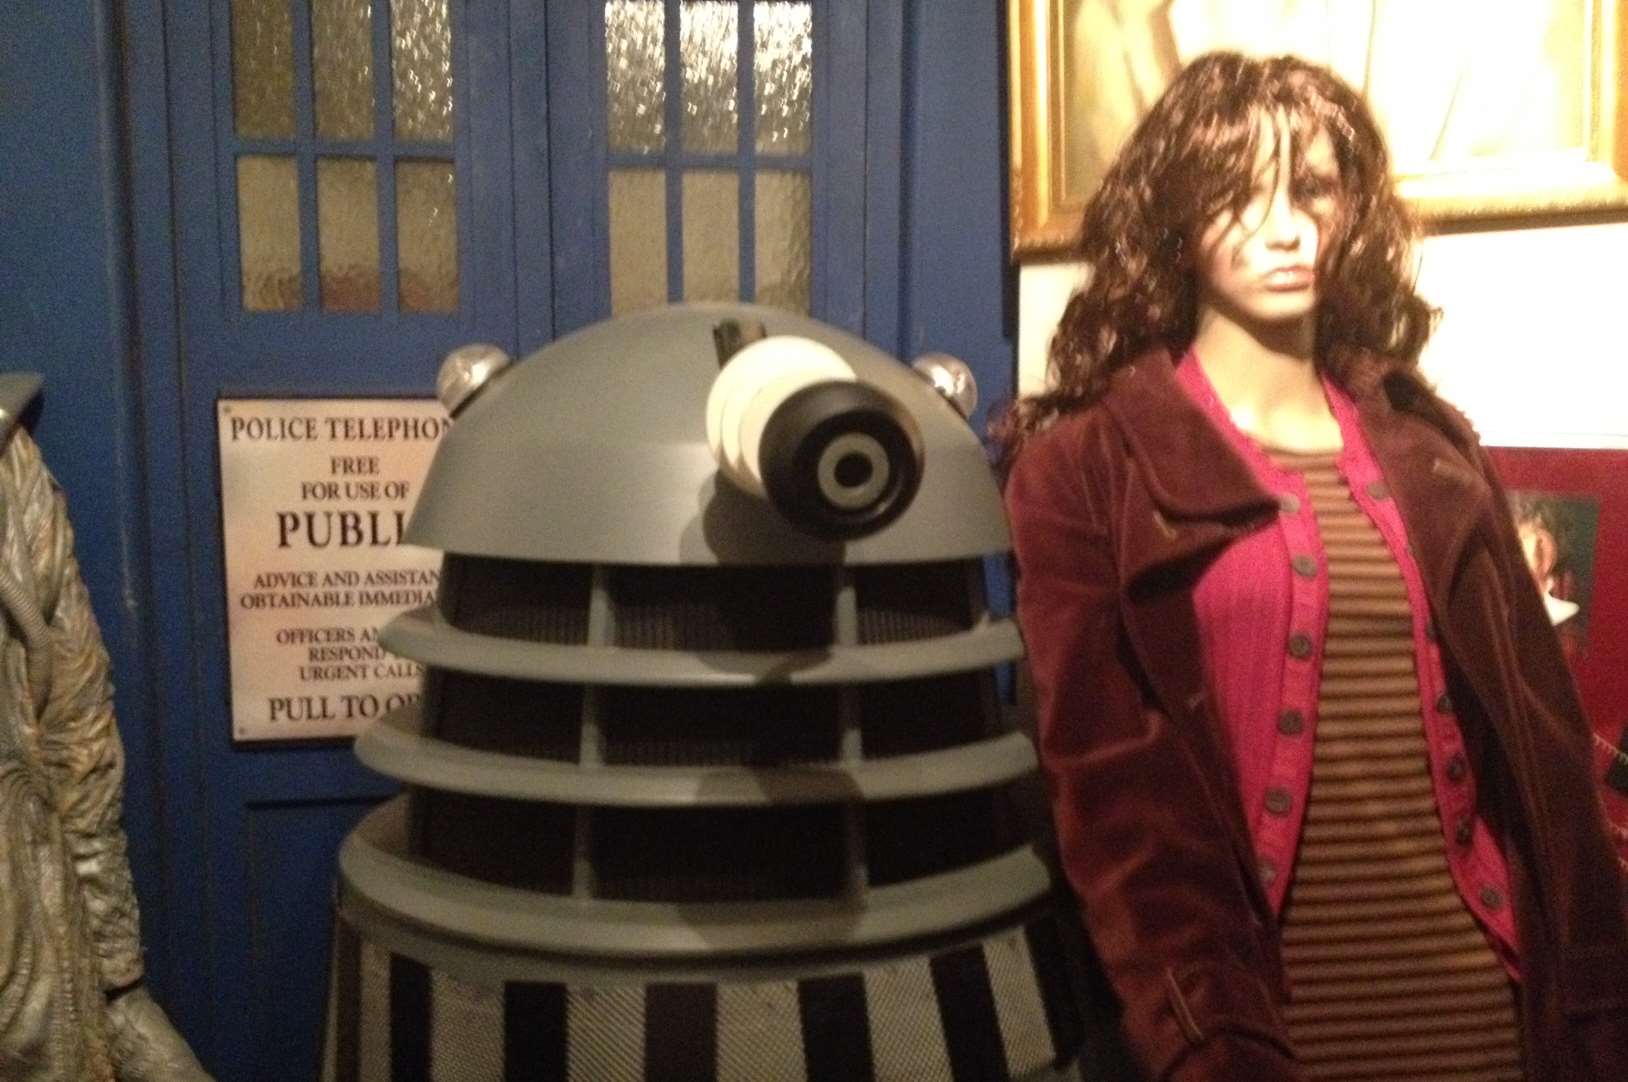 The mannequin here is wearing the jacket of Doctor Who's assistant Sarah-Jane Smith